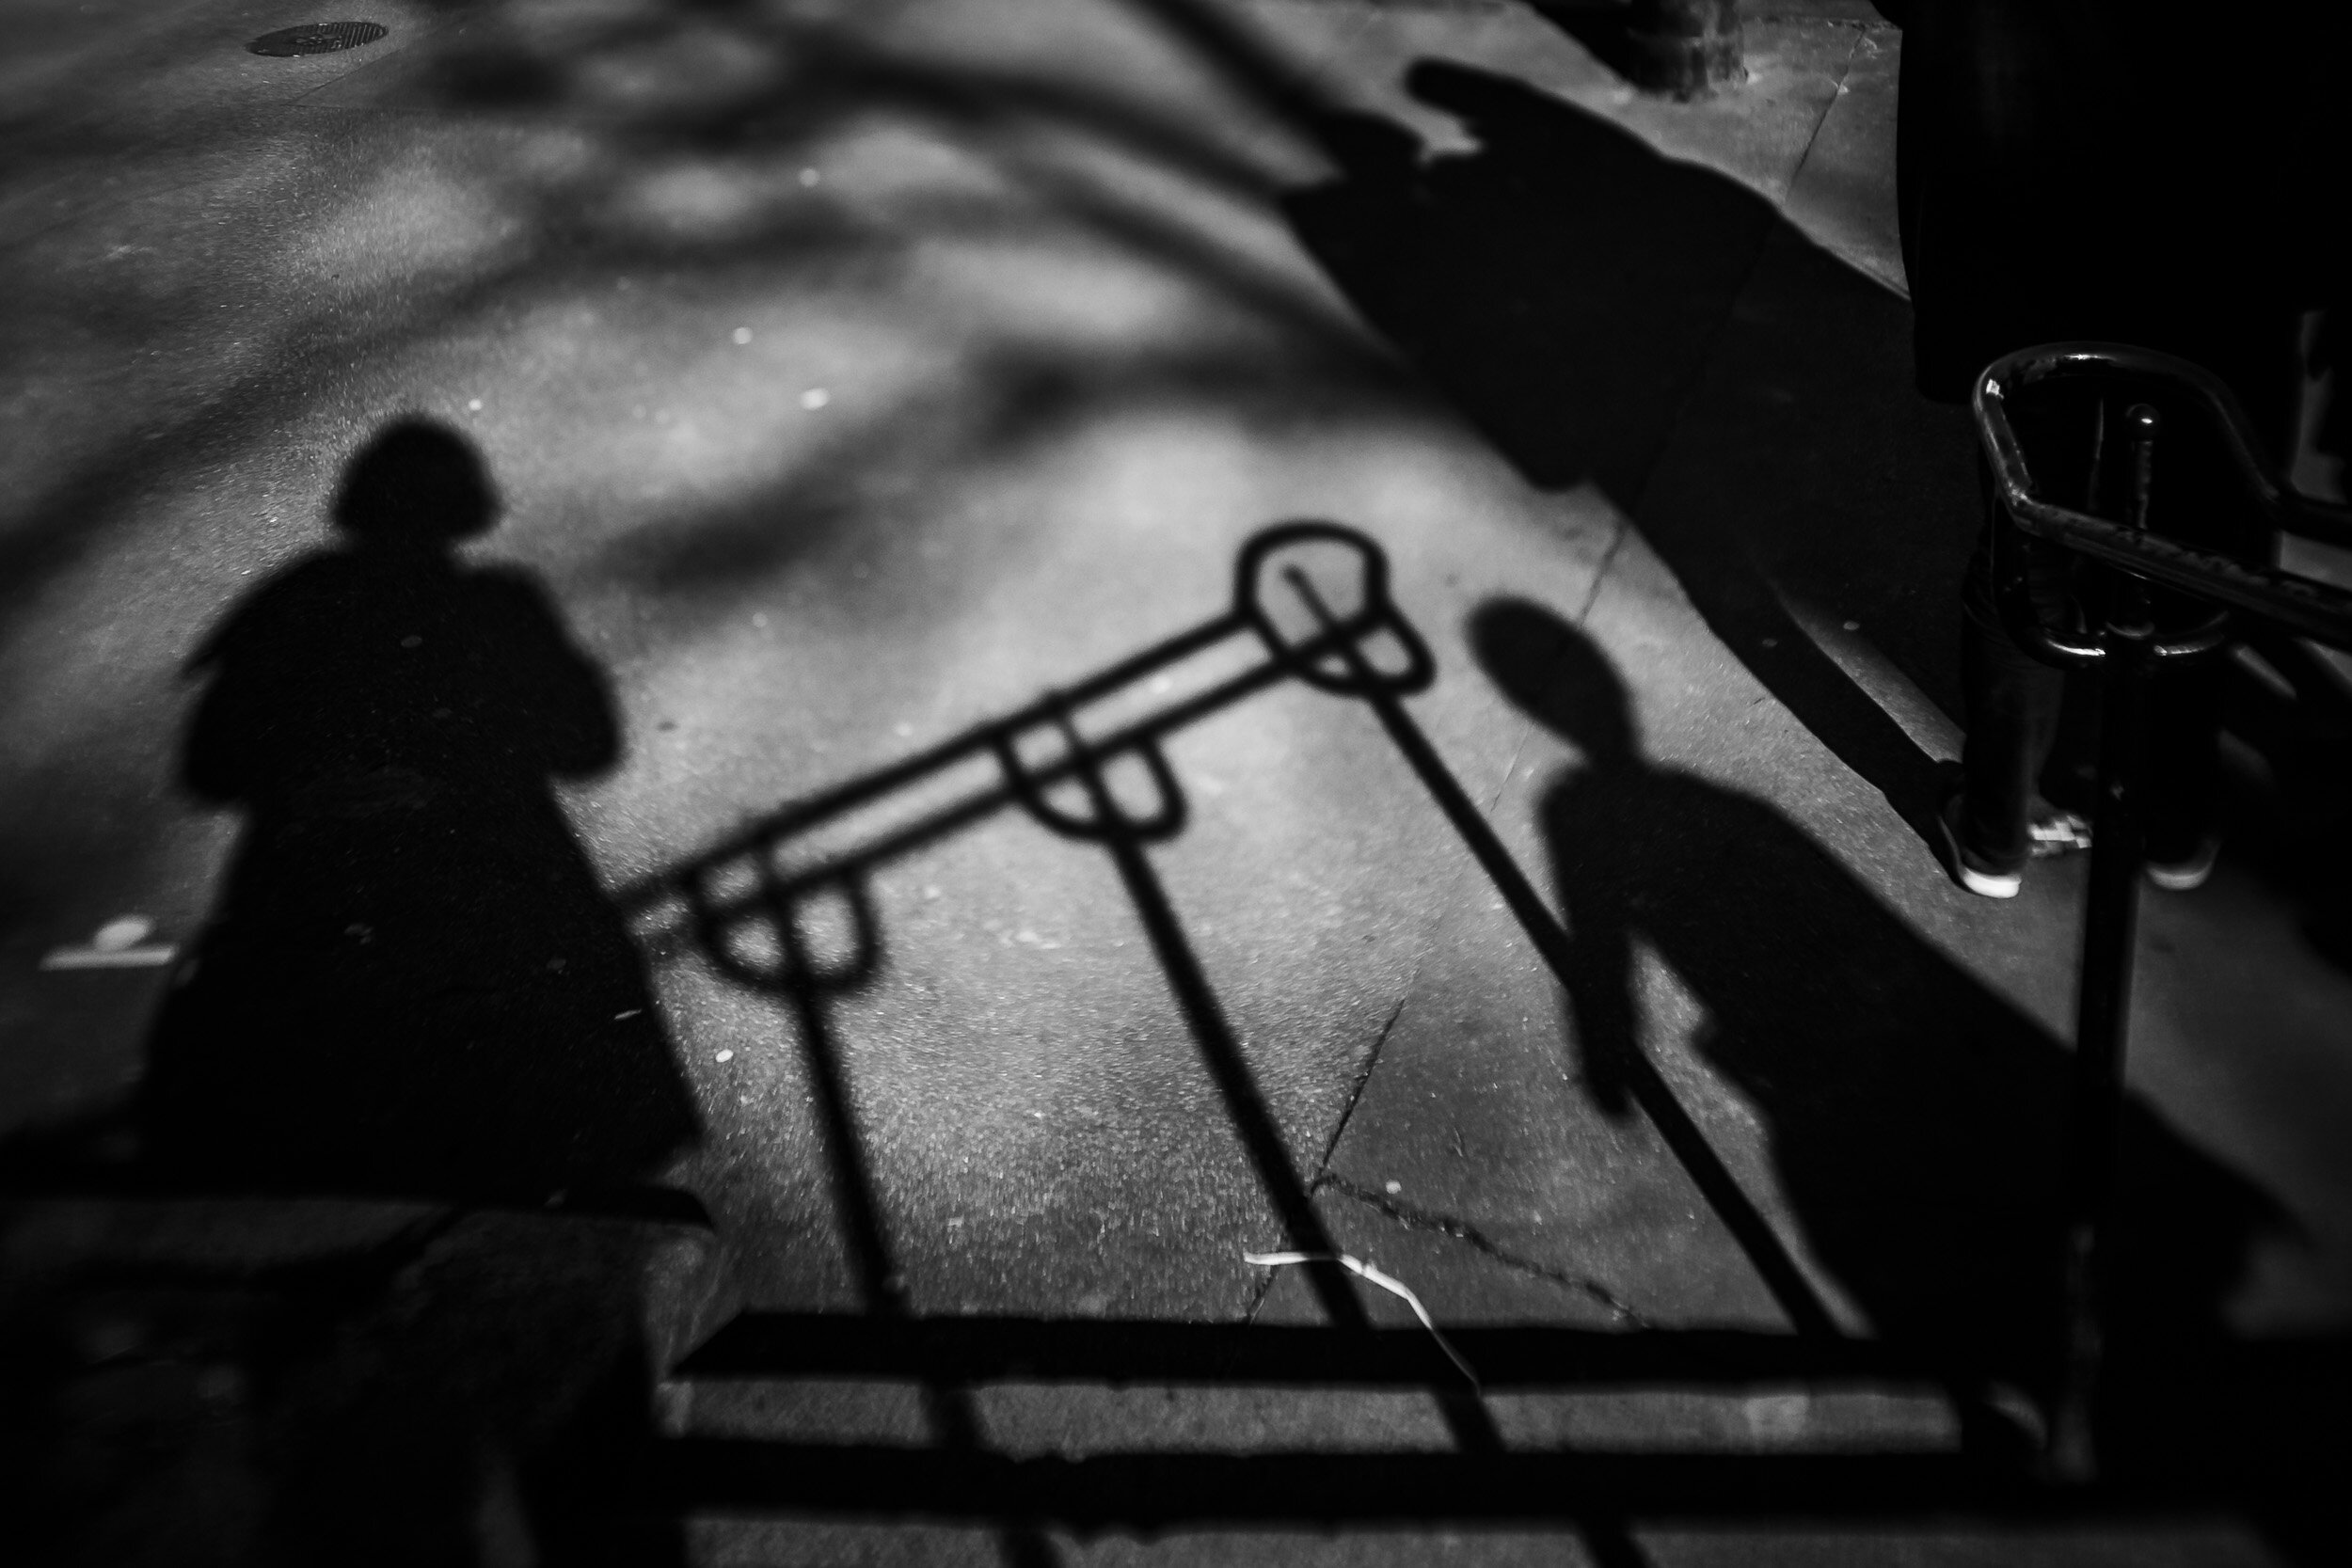 strong-shadows-of-persons-02.jpg